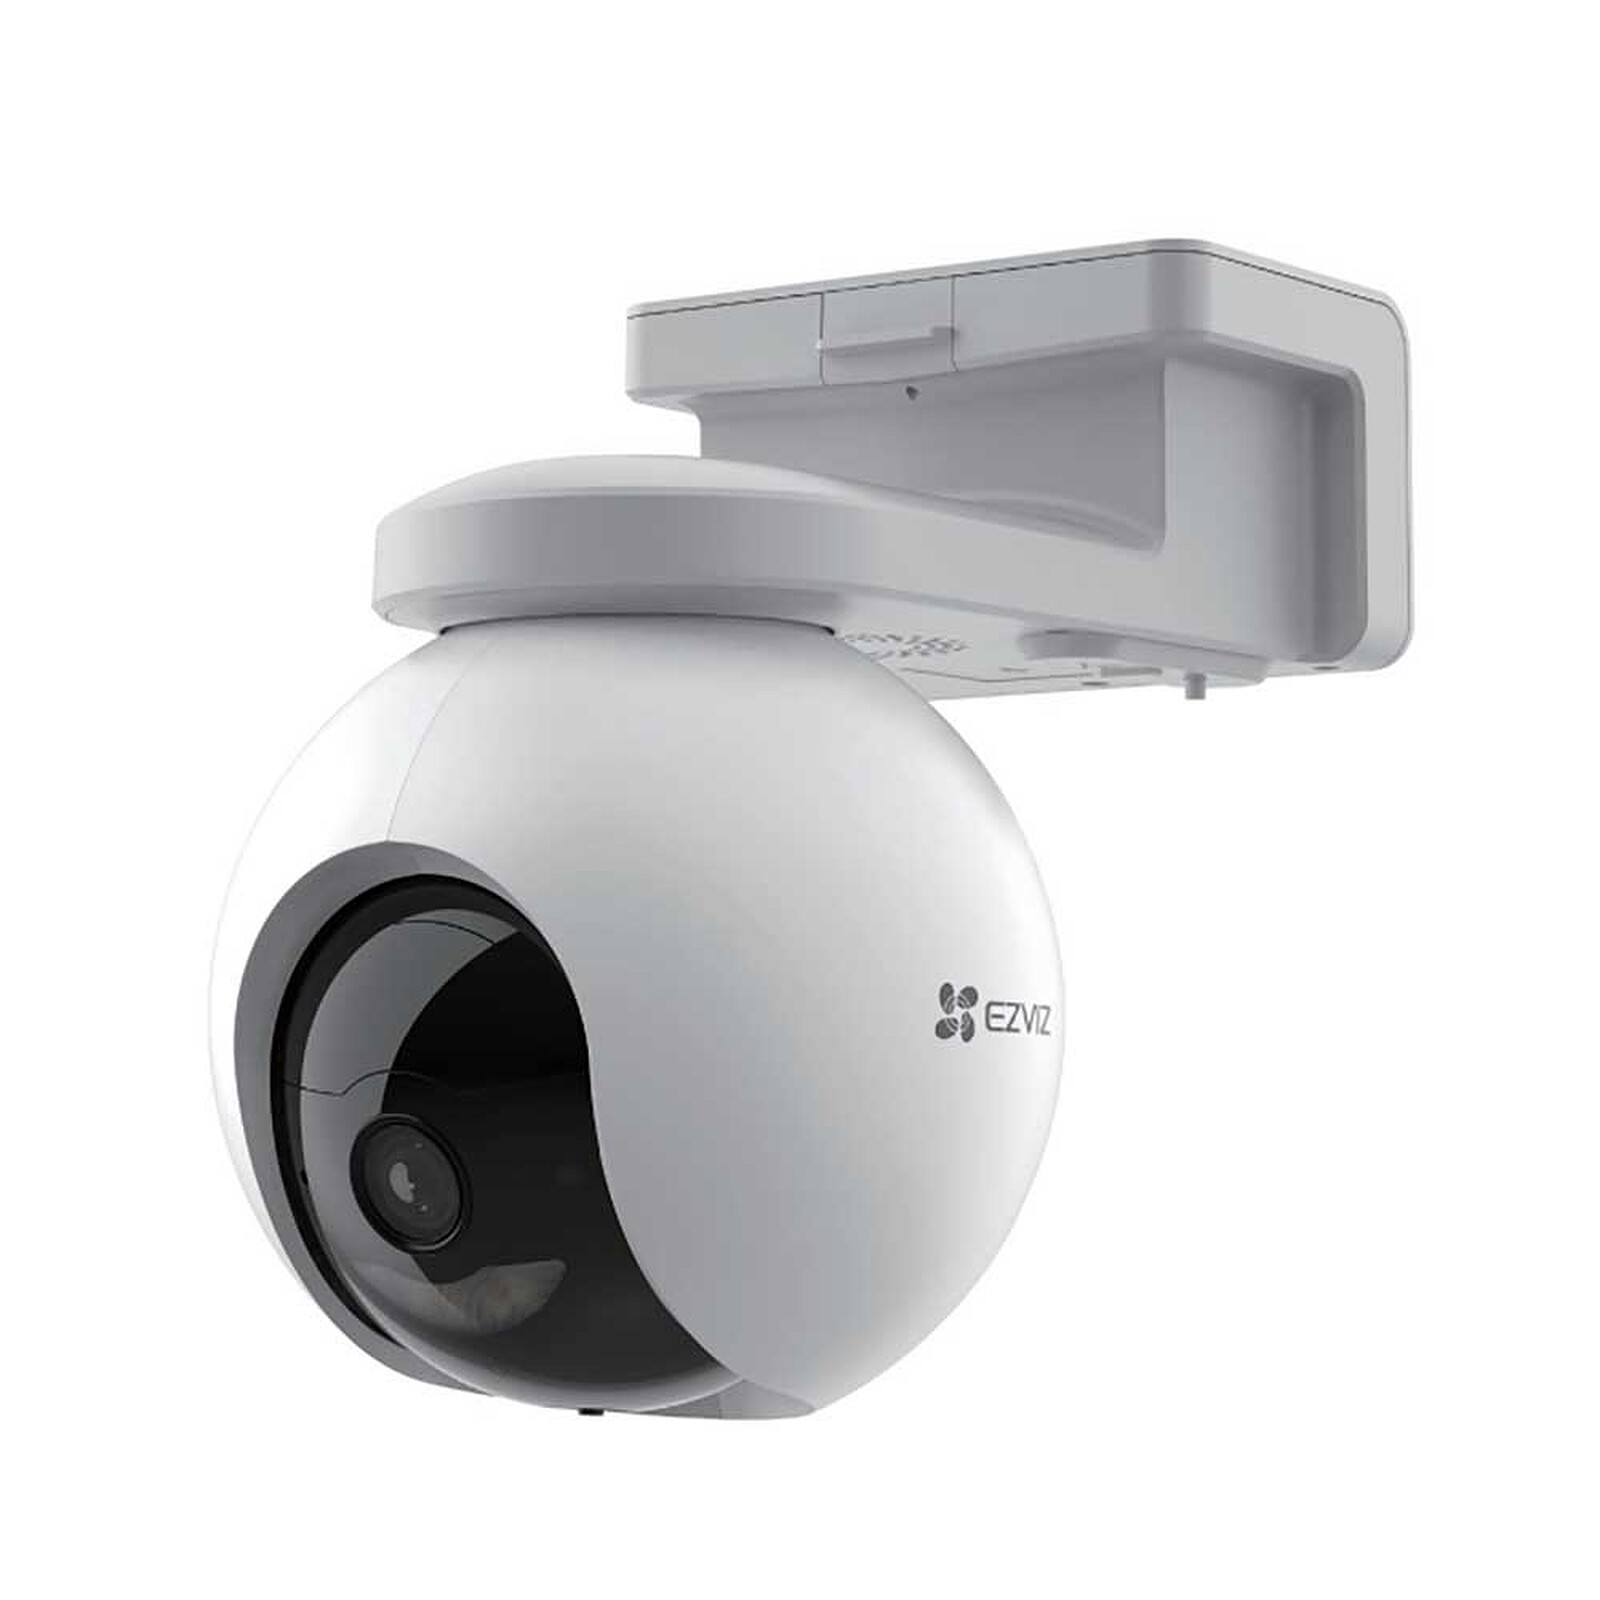 The new EZVIZ H3C Camera offers affordable but effective outdoor home  protection